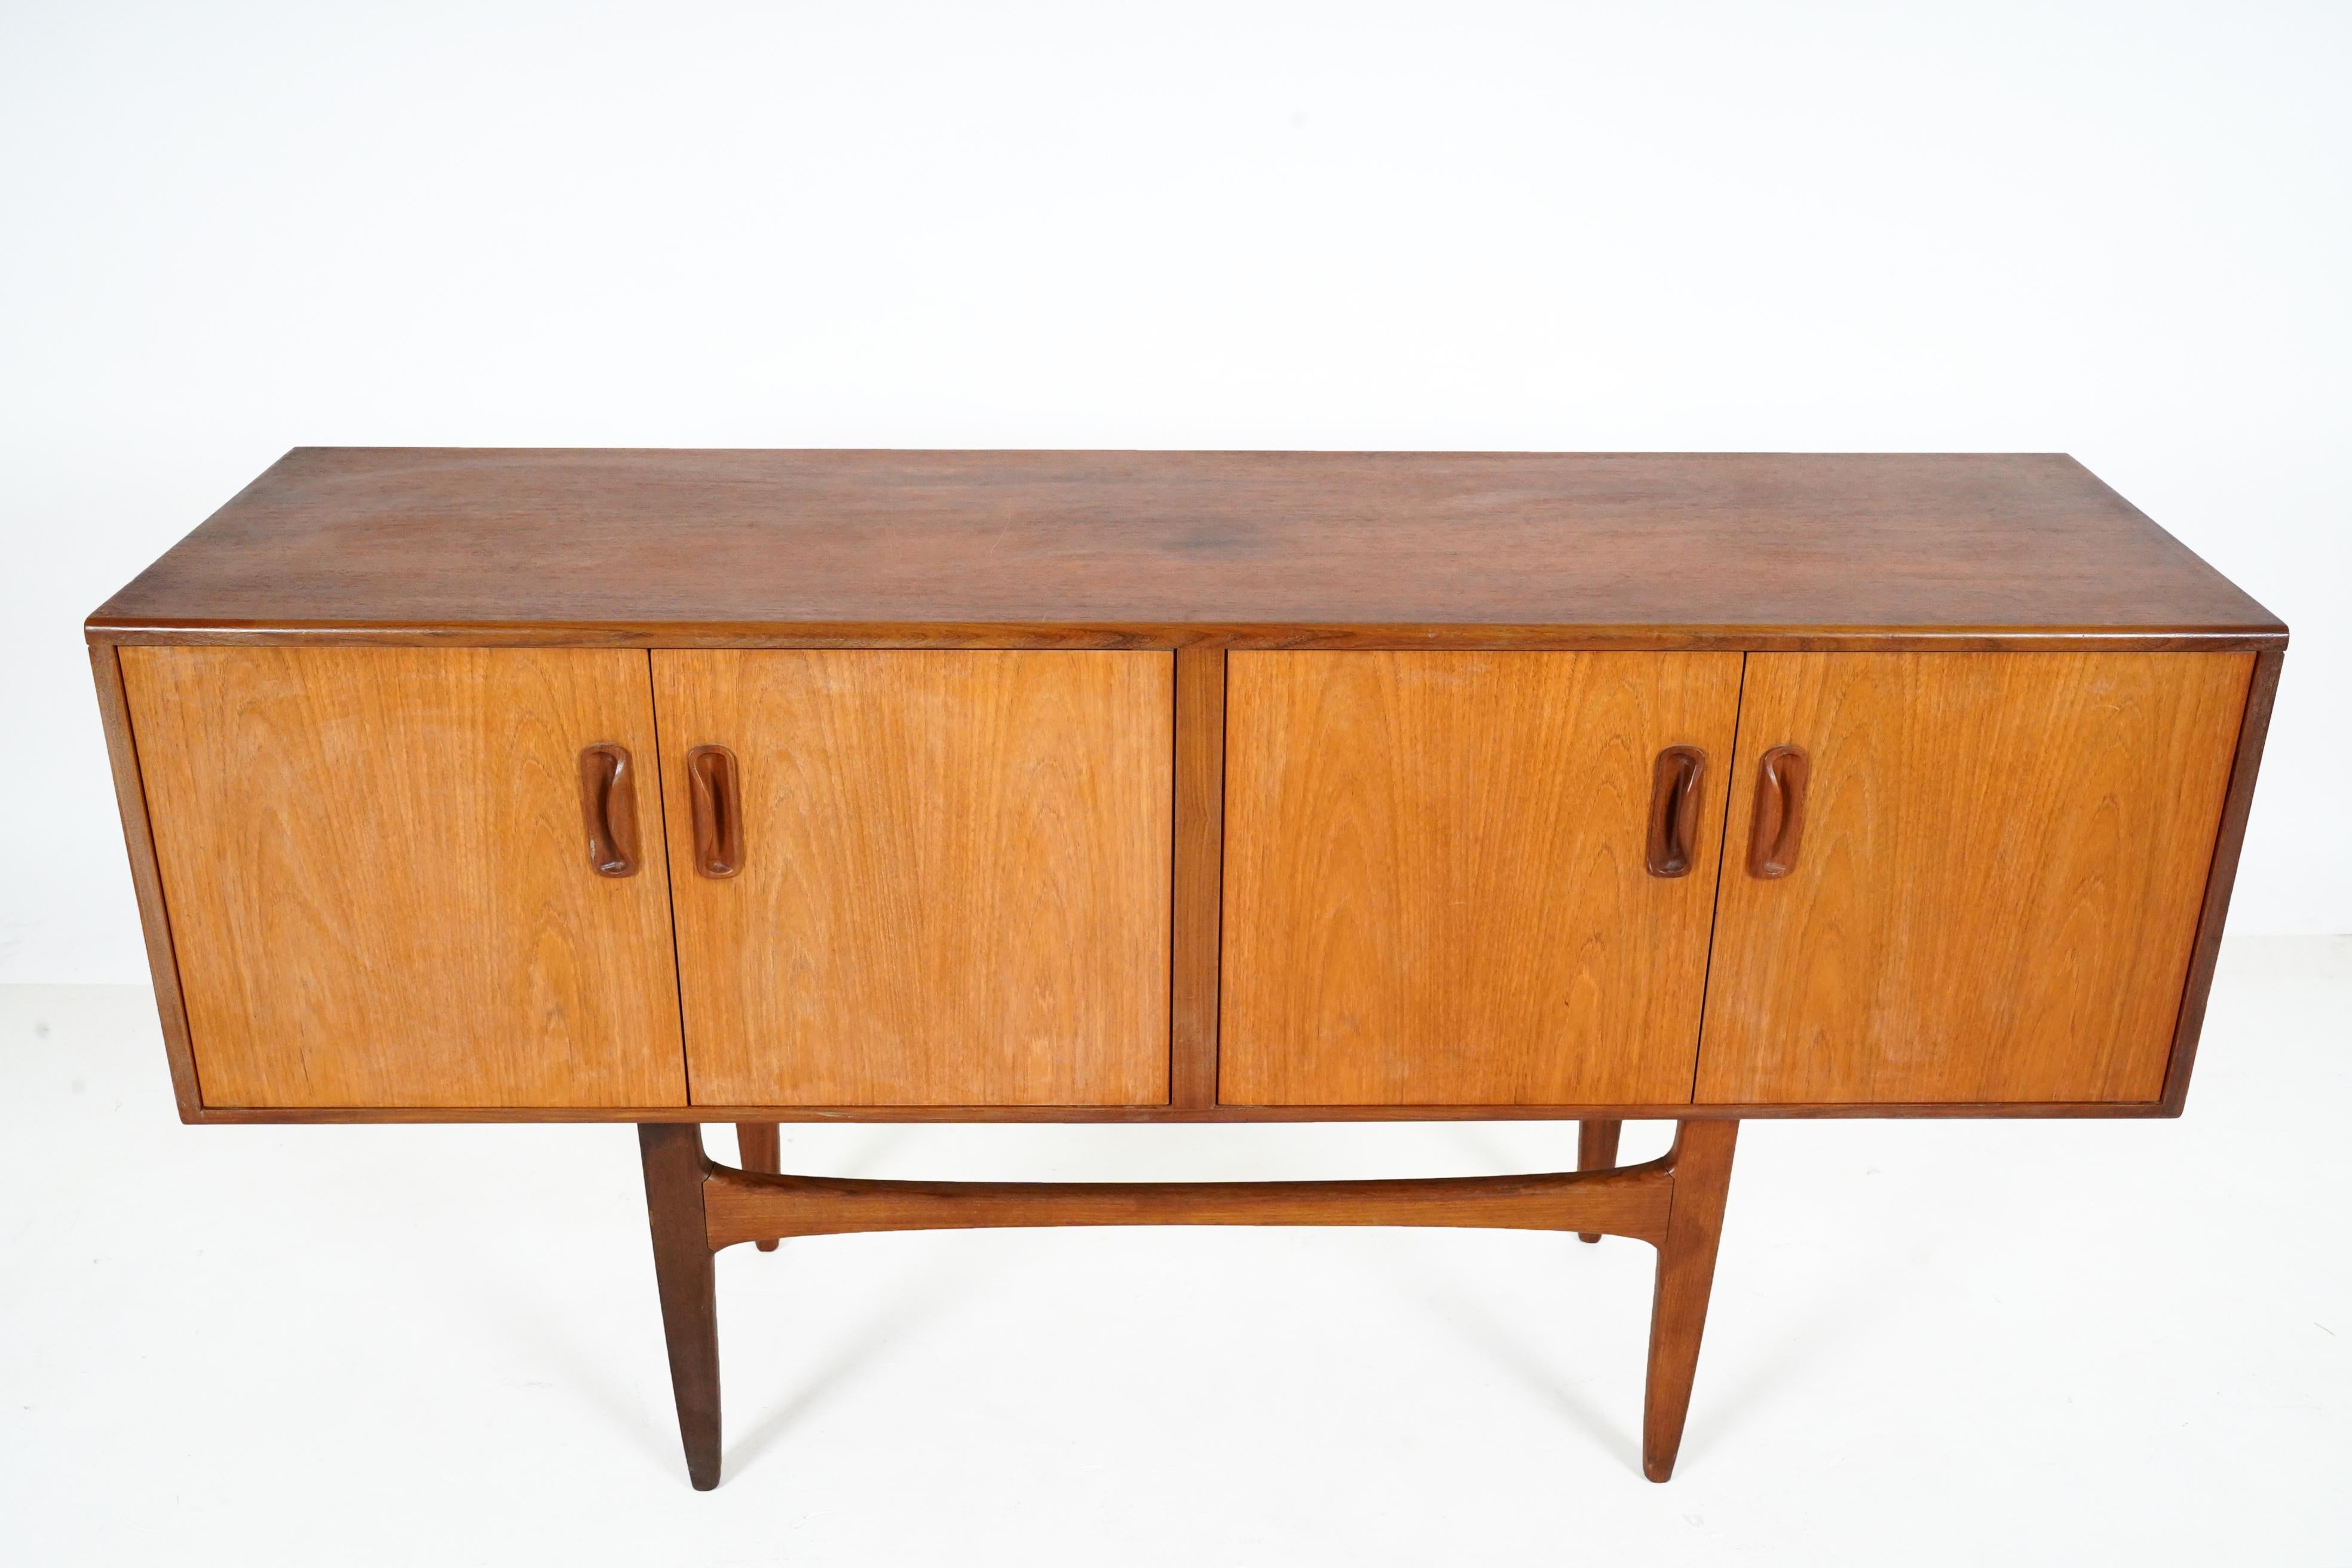 A midcentury Danish oak credenza, circa 1960. This credenza has an elegant and functional design, typical of Scandinavian manufacture. This credenza was constructed from oak wood veneer, which has been carefully selected for understated and uniform